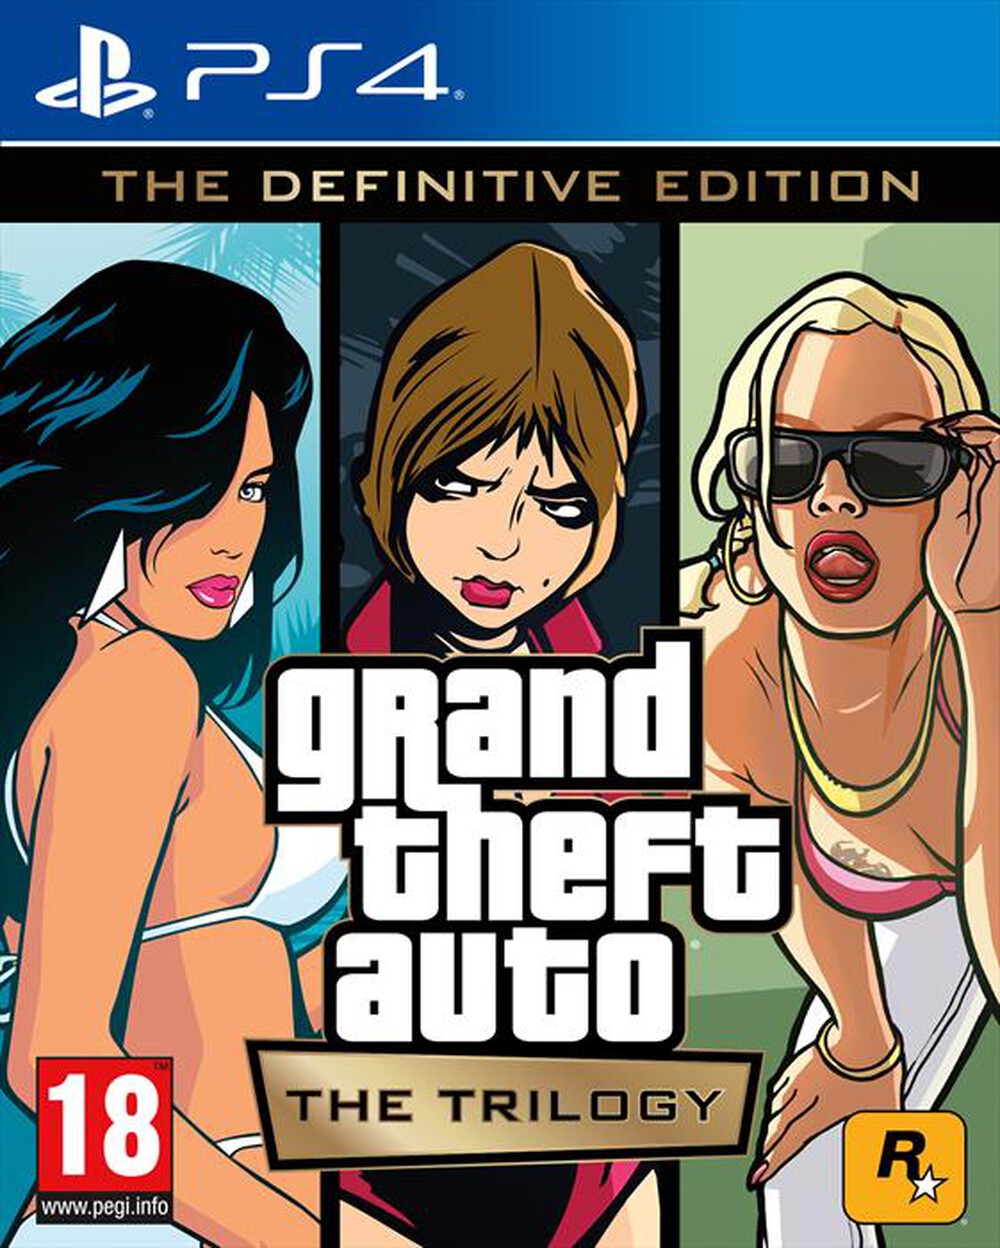 "ROCKSTAR GAMES - GRAND THEFT AUTO: THE TRILOGY - THE DEFINITIVE ED."